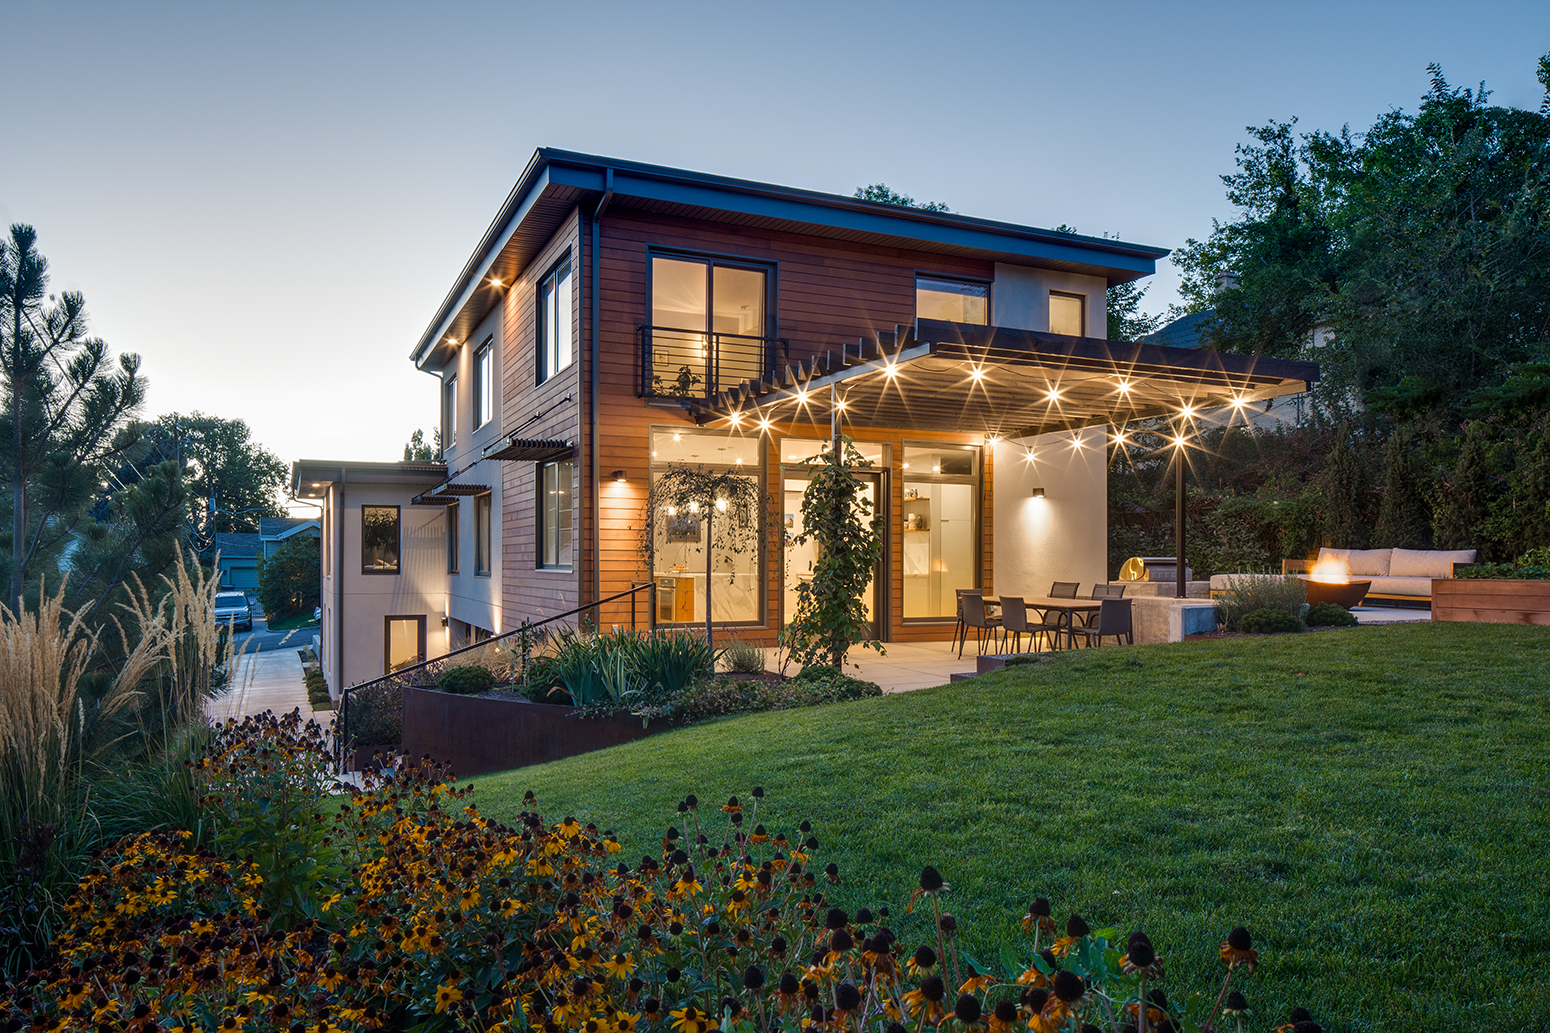 Exterior photograph of the back veranda and yard of a modern home in a residential neighborhood known as the Avenies at dusk in Salt Lake City, UT. Ther veranda has sparkling lights draped above the concrete sitting area with an open fire pit lit and flames. 